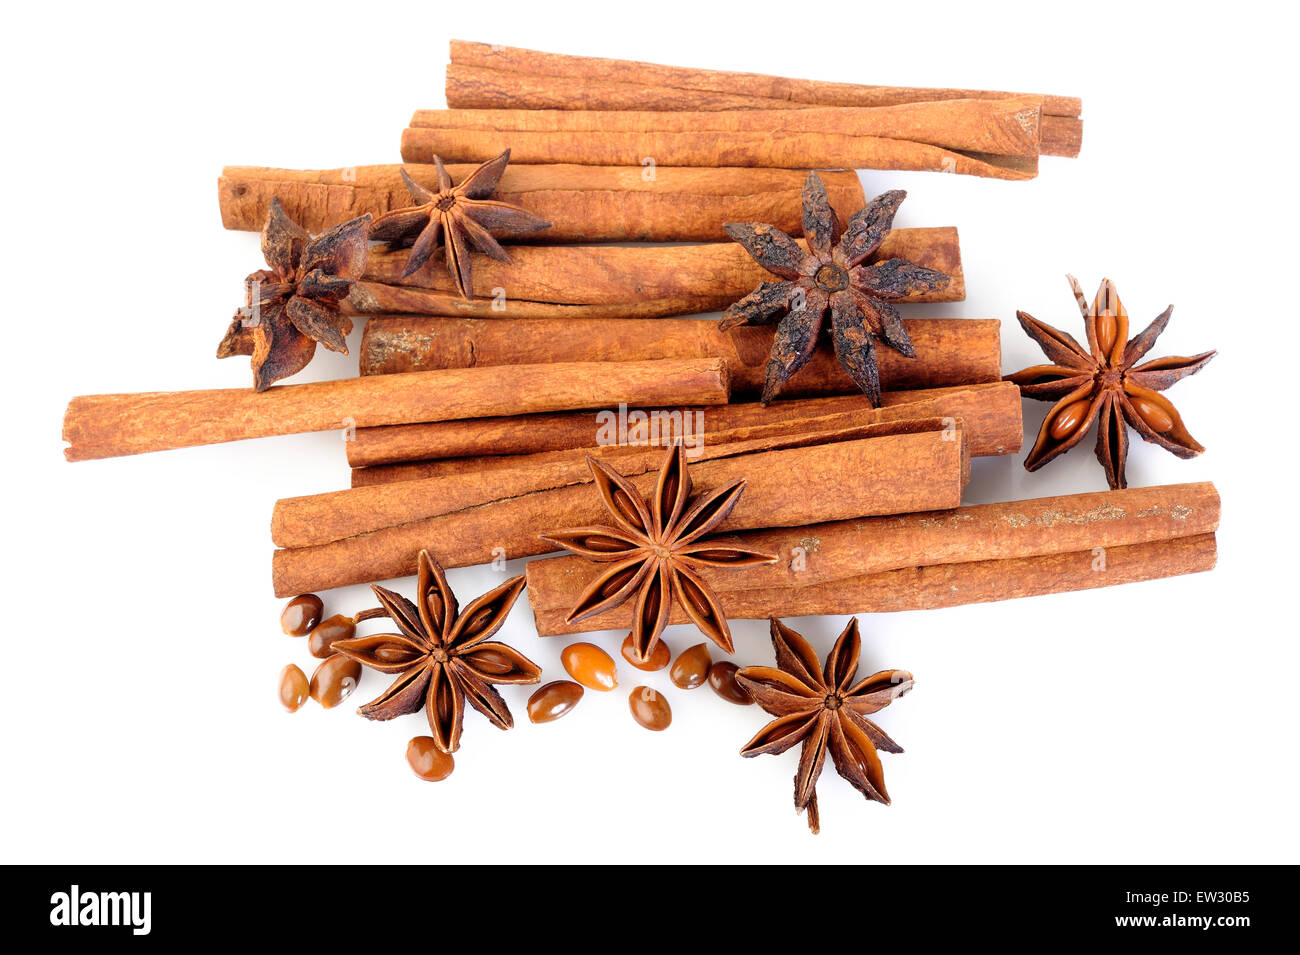 cinnamon stick and star anise spice Stock Photo